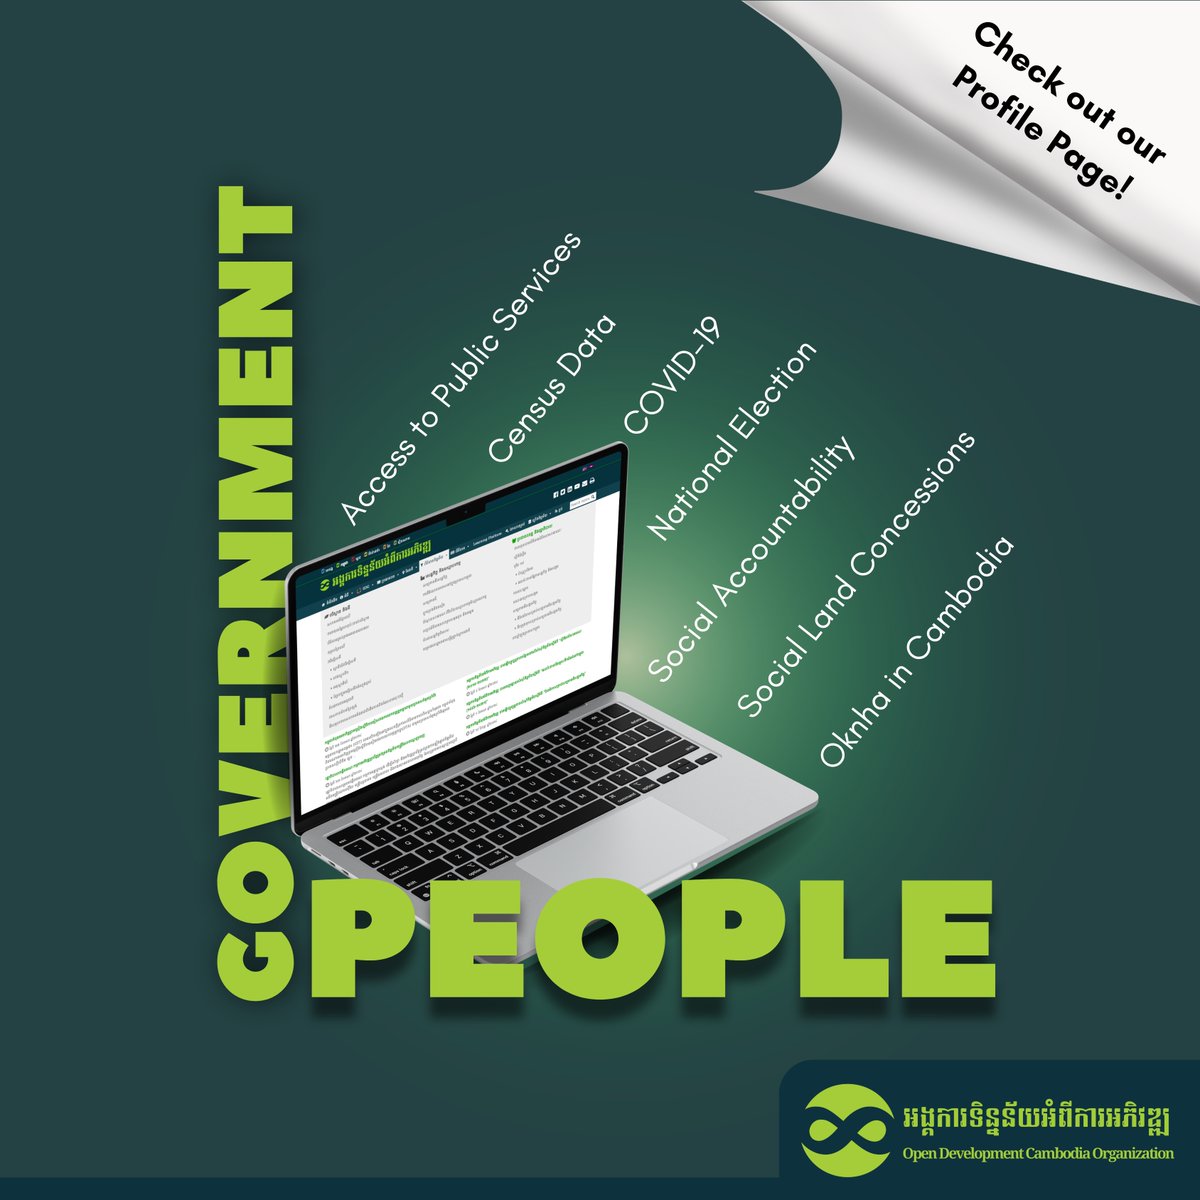 Dive into insightful articles and the latest updates on our 'People and Government' profile page on Open Development Cambodia Organization's Website. 👉 Visit Now: opendevelopmentcambodia.net #People #Government #ProfilePage #ODC